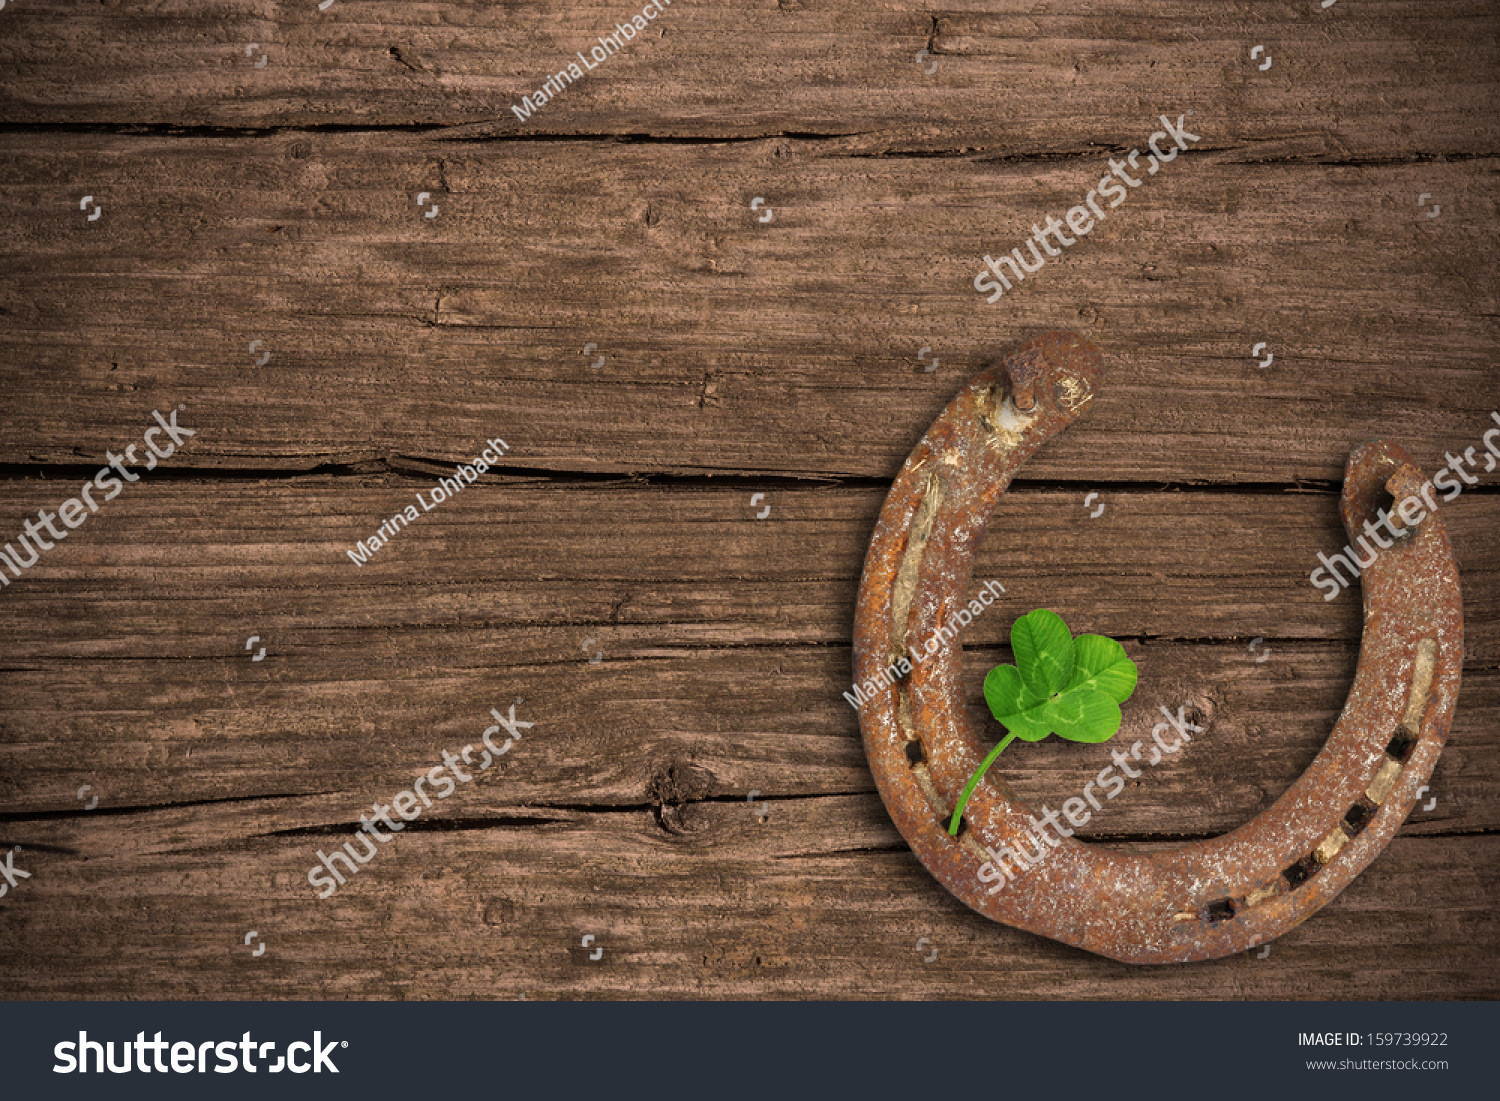 Blackboard with four-leaved clover and a horse shoe #159739922